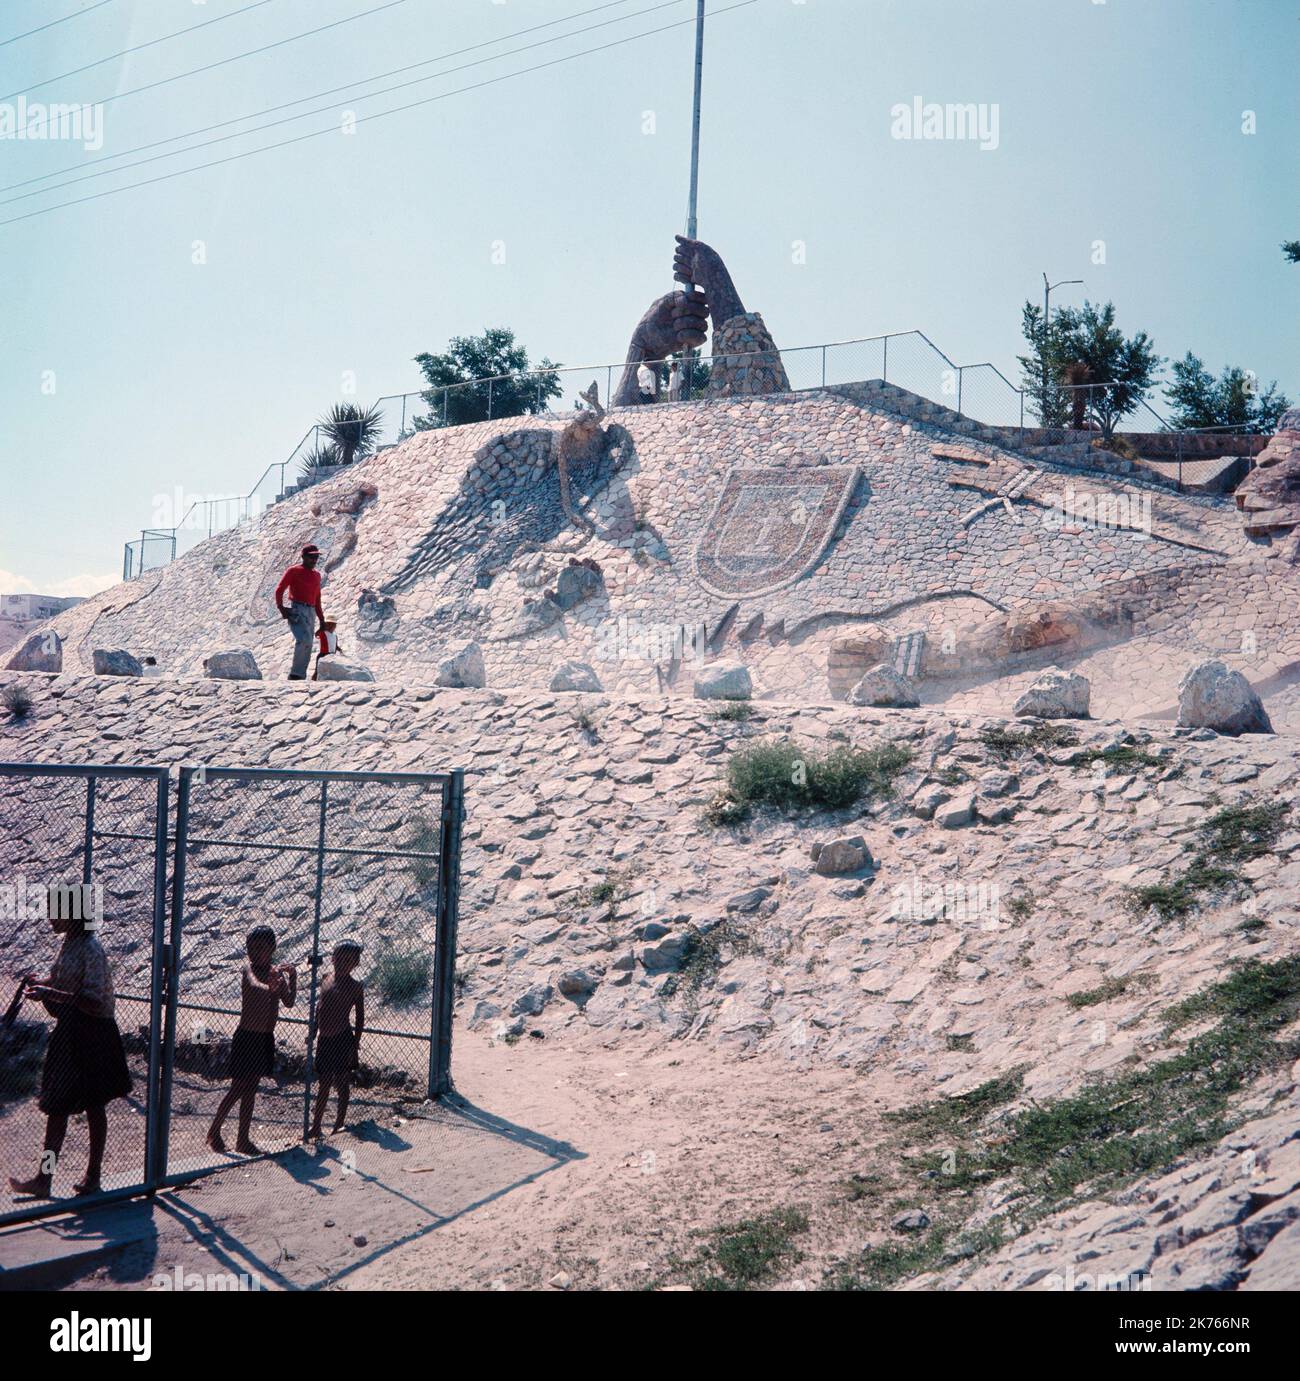 A vintage 1966 colour photograph showing g the Workers Statue in Ciudad Juarez, Mexico. Stock Photo